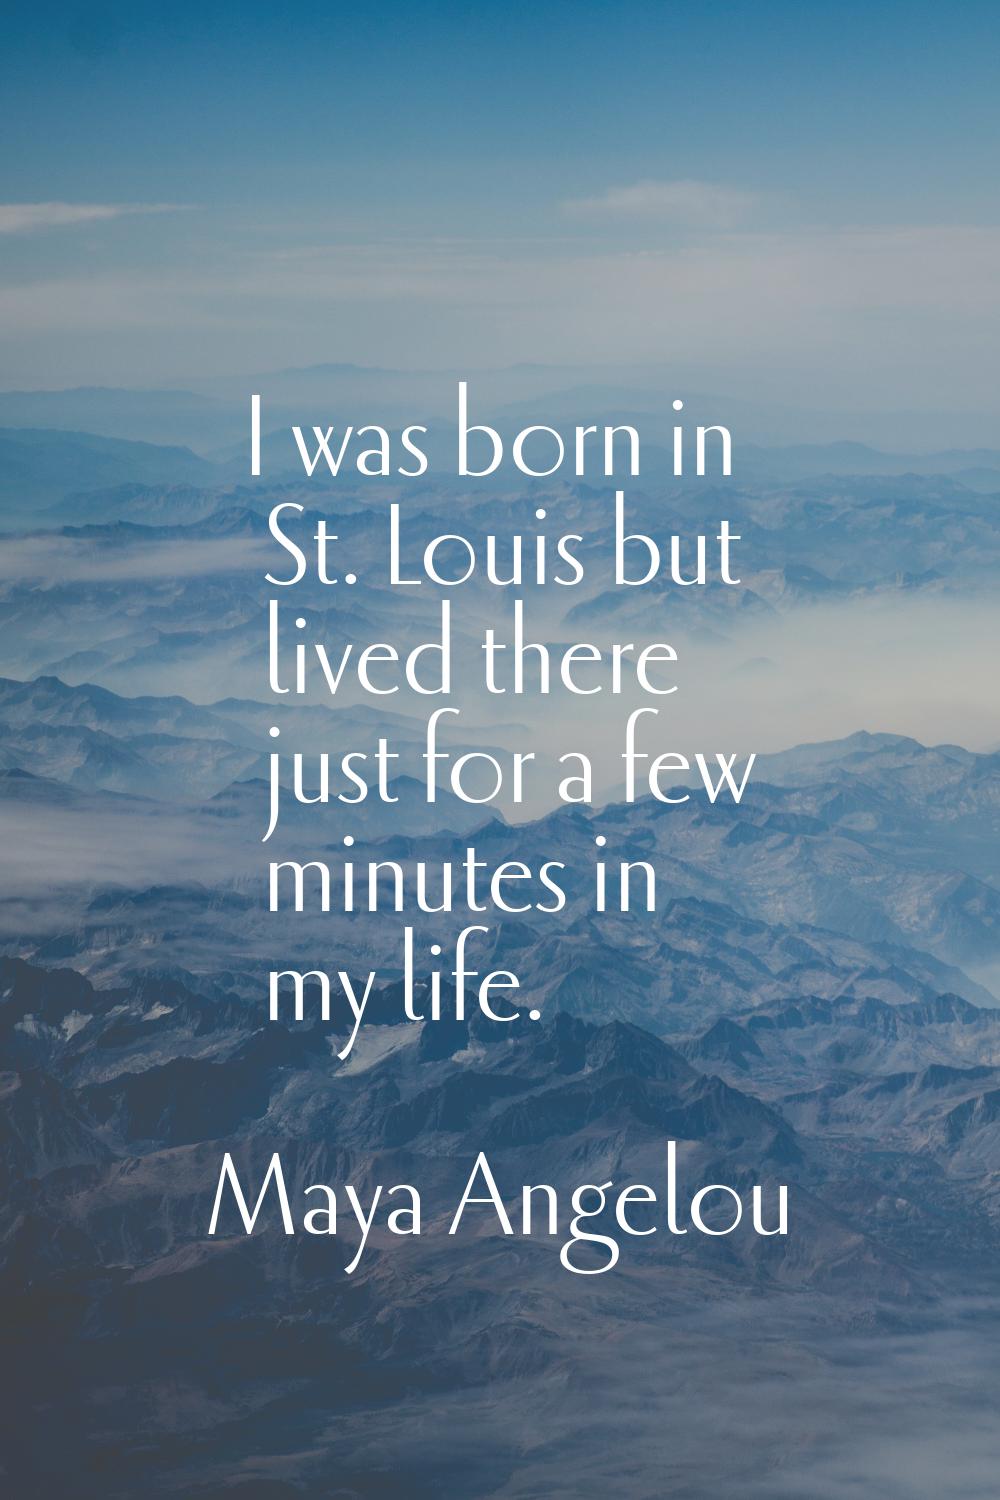 I was born in St. Louis but lived there just for a few minutes in my life.